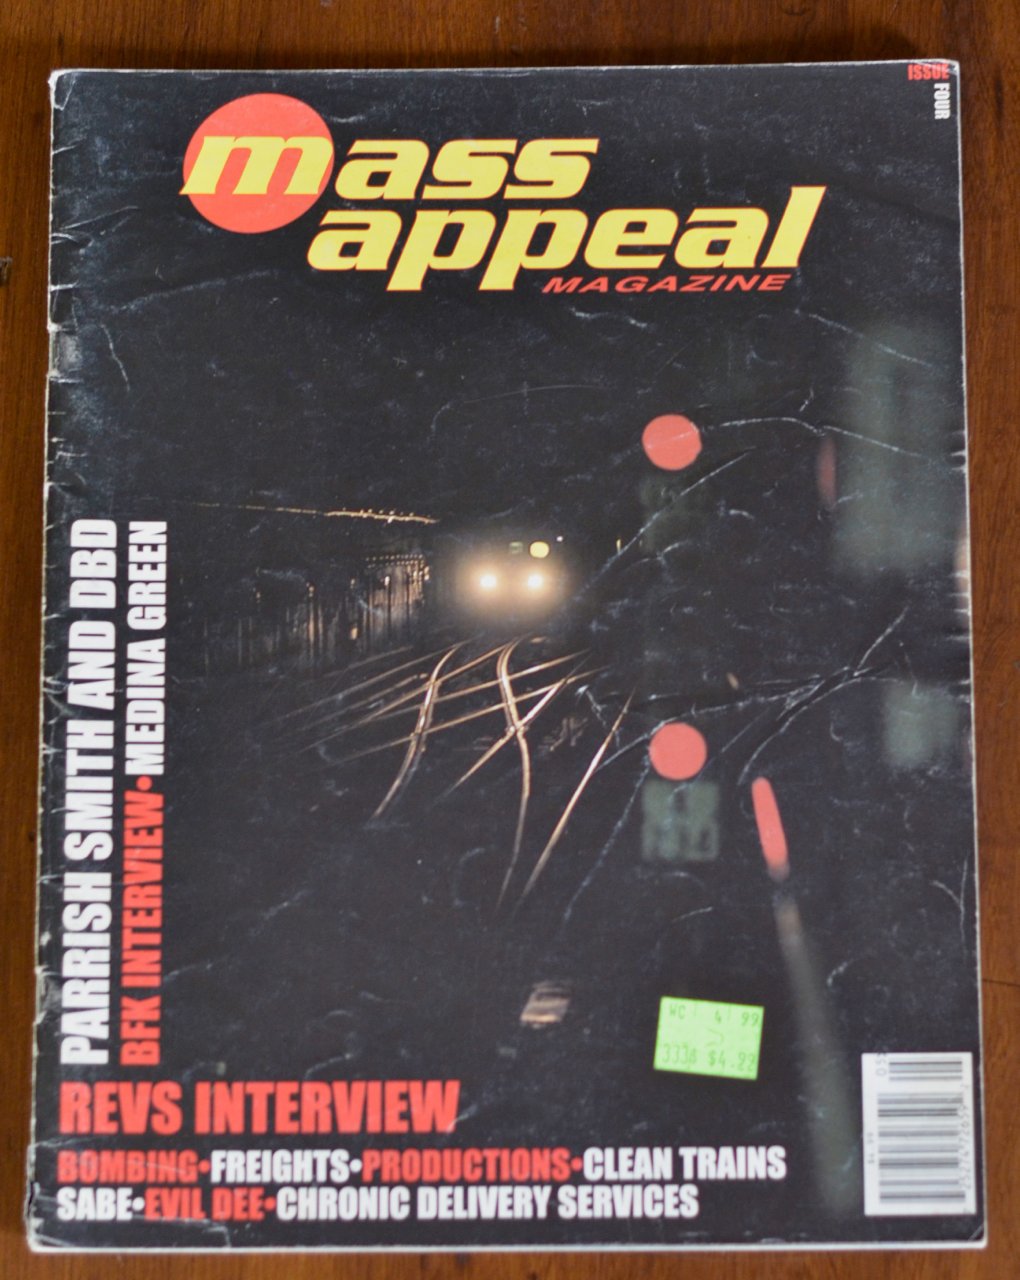 MASS APPEAL MAGAZINE - ISSUE 4 | SKATEBOARDS AND GRAFFITI